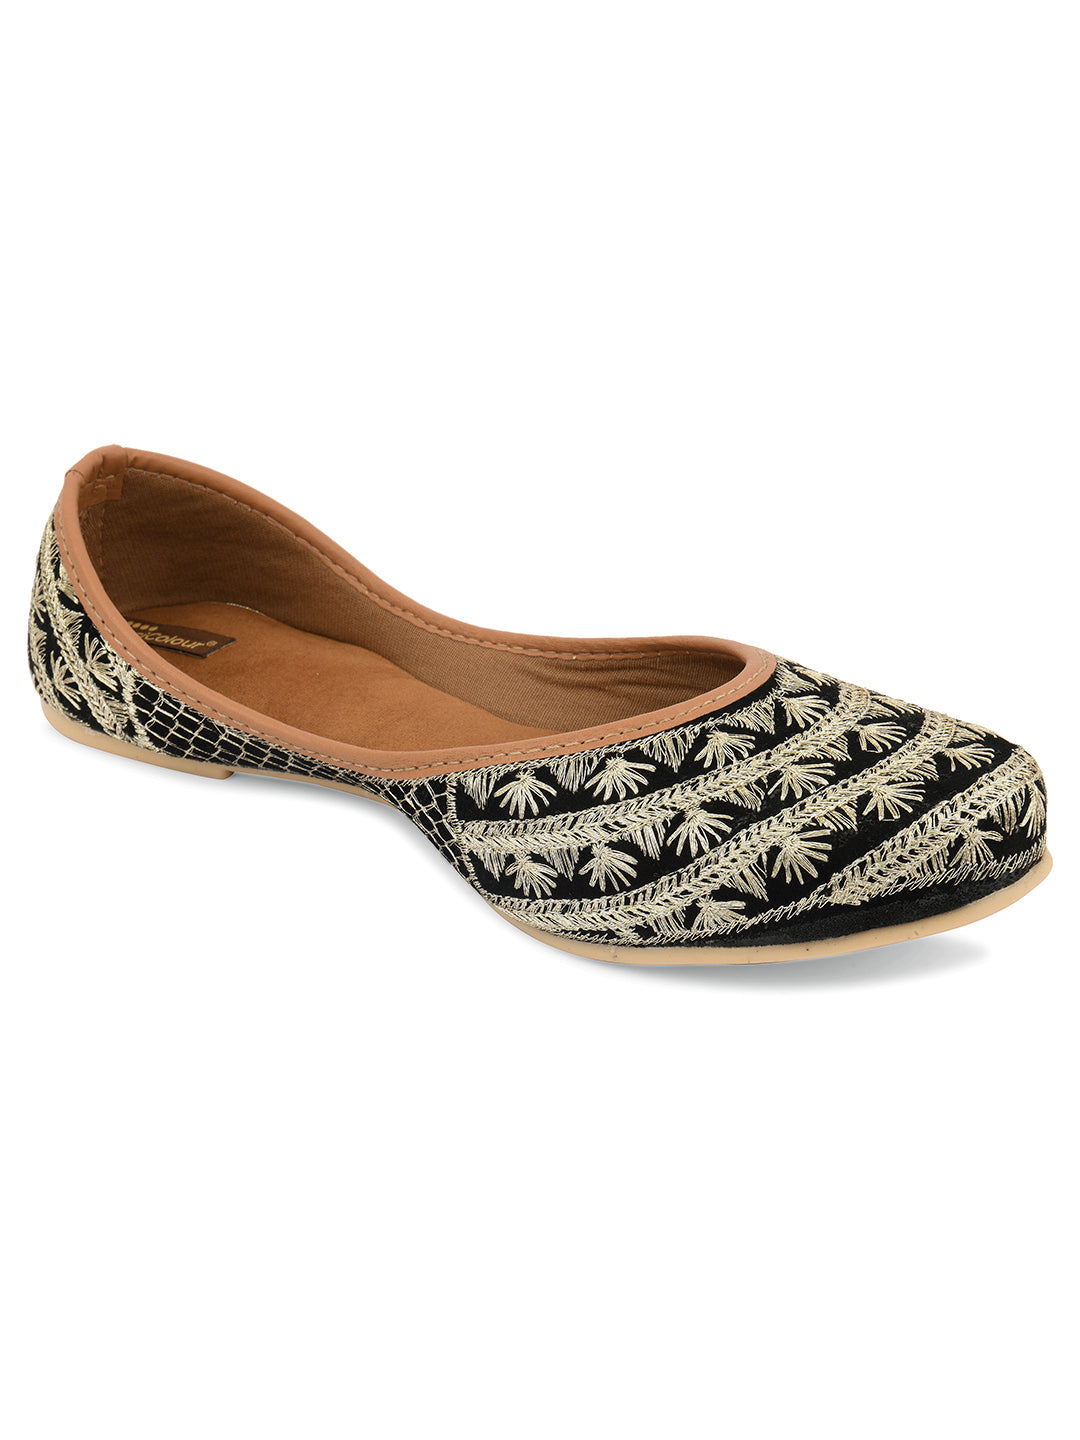 Women's Black Embroidered  Indian Ethnic Comfort Footwear - Desi Colour